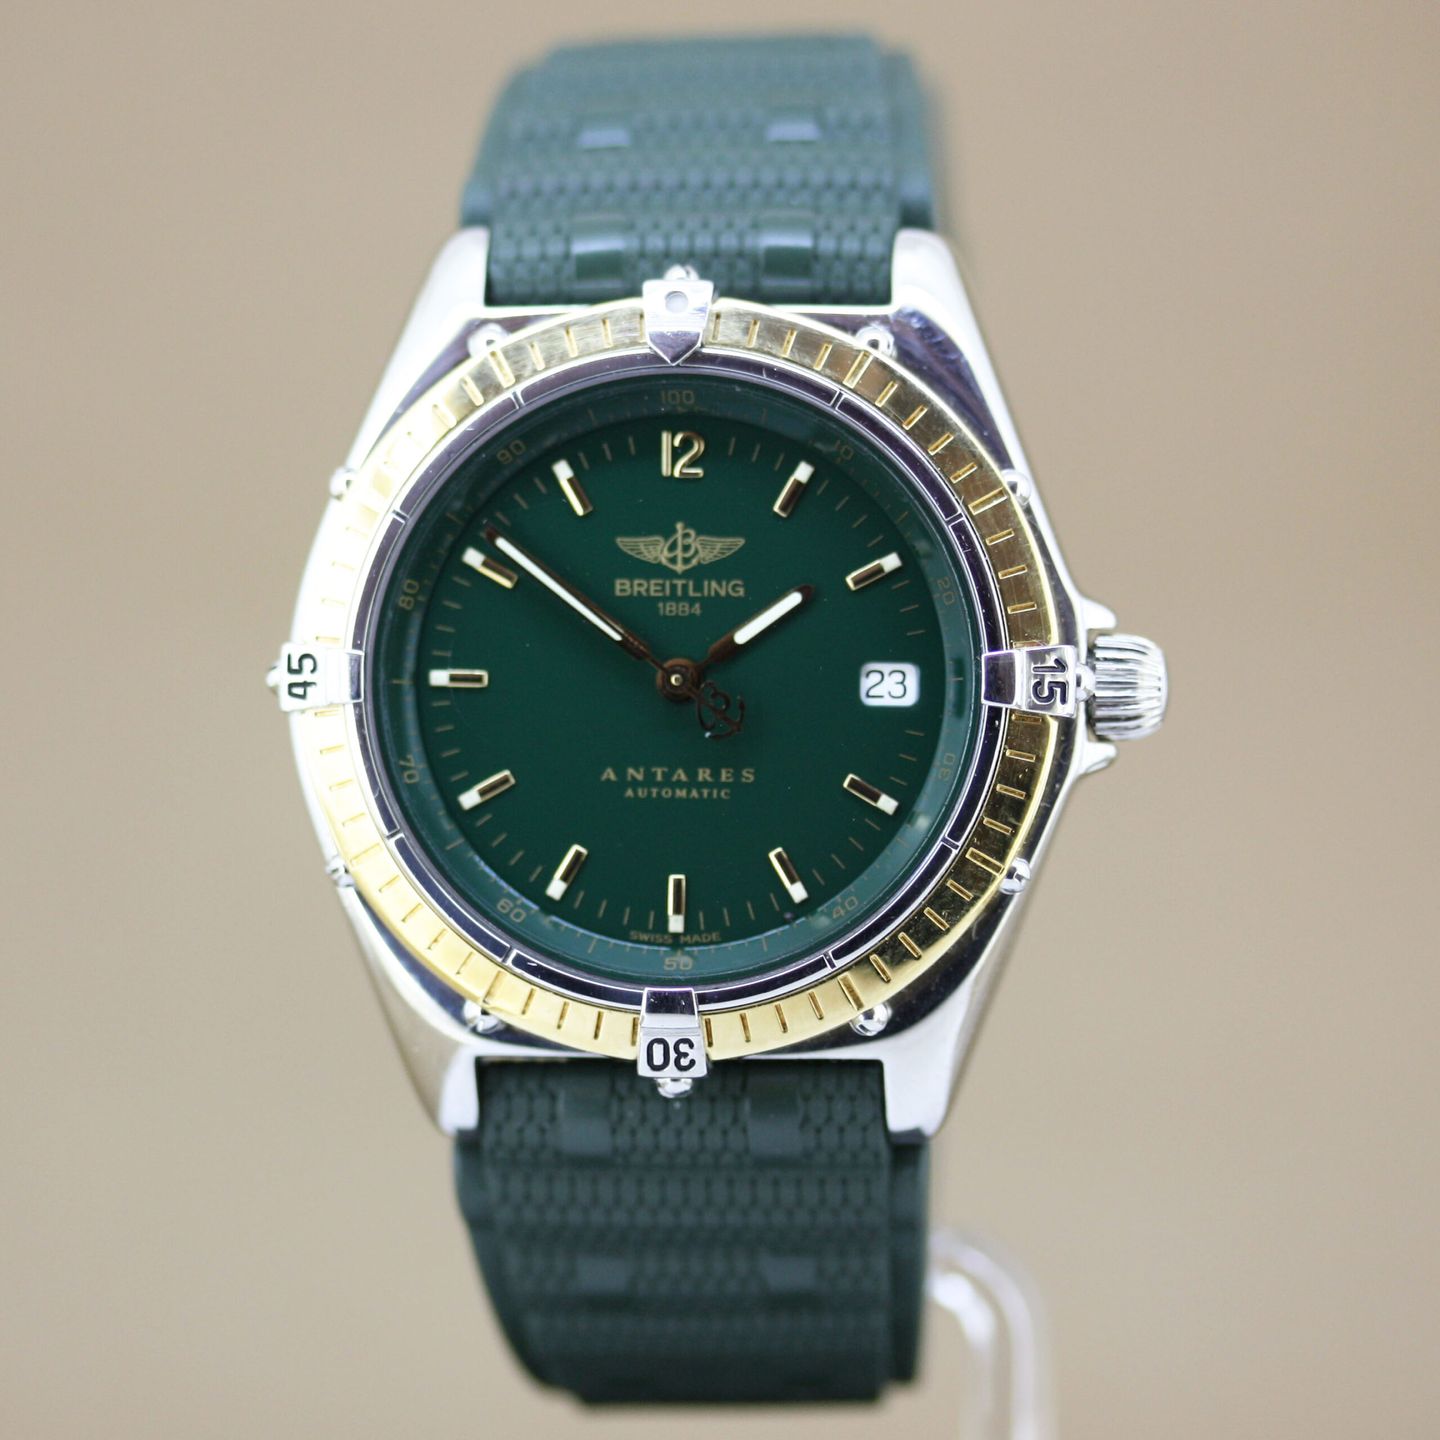 Breitling Antares Breitling D10048 (1990) - Green dial 39 mm Steel case (2/8)